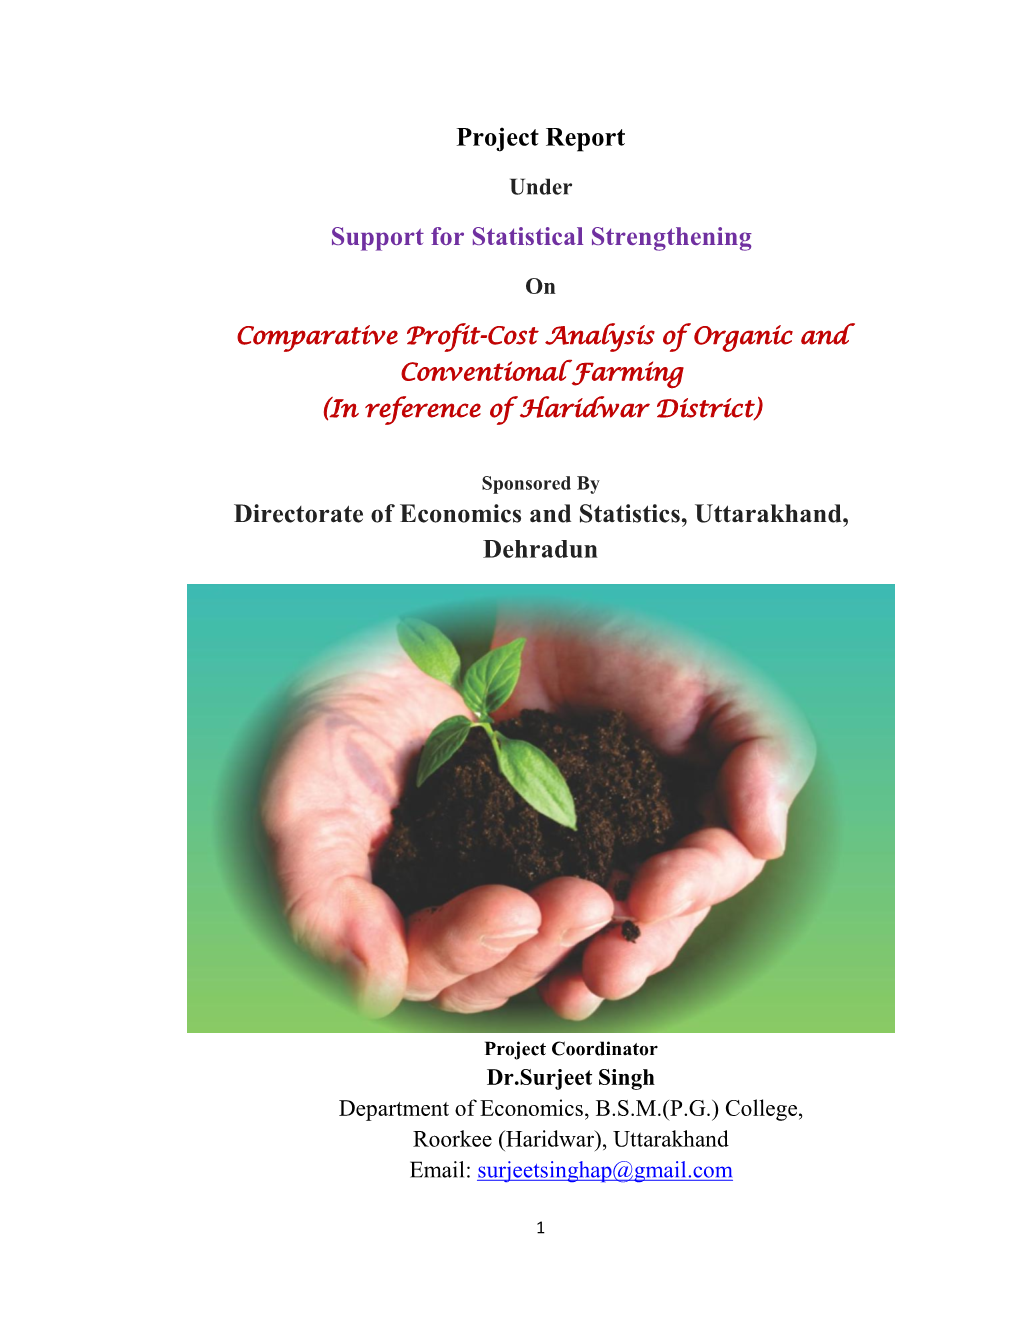 Comparative Profit-Cost Analysis of Organic and Conventional Farming (In Reference of Haridwar District)